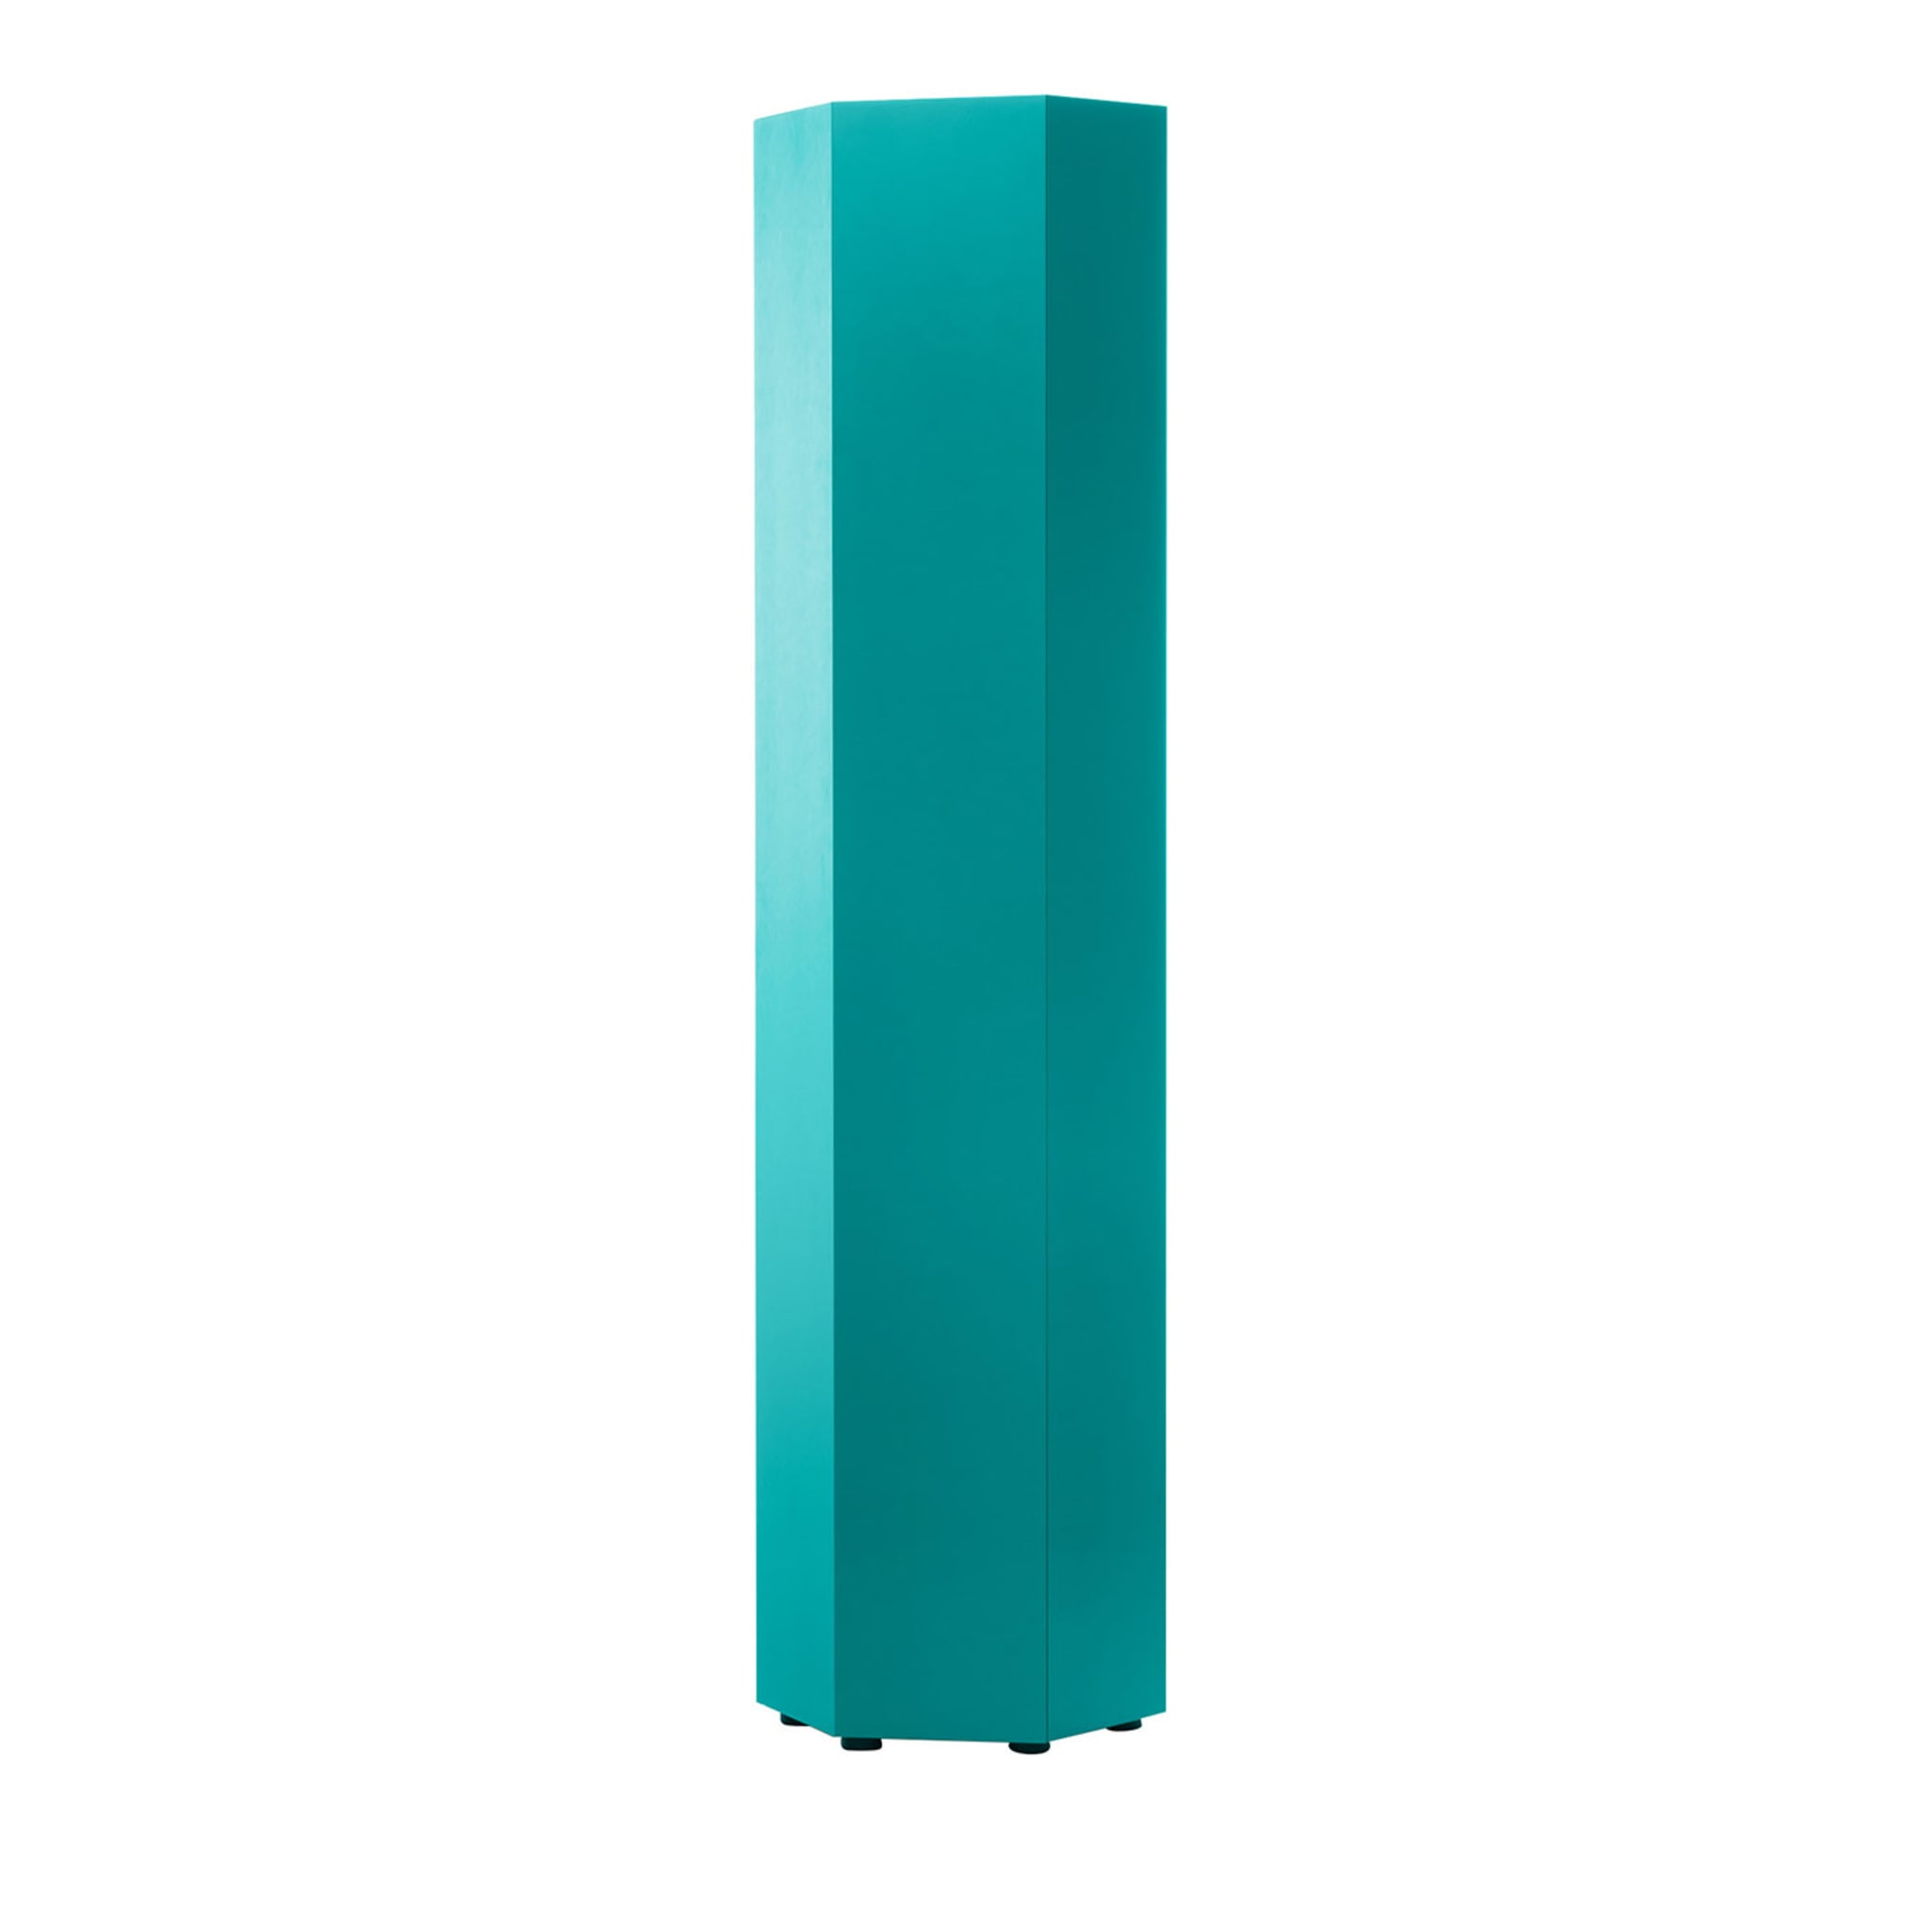 Exagon 215 Teal Container by Claudio Bitetti - Main view